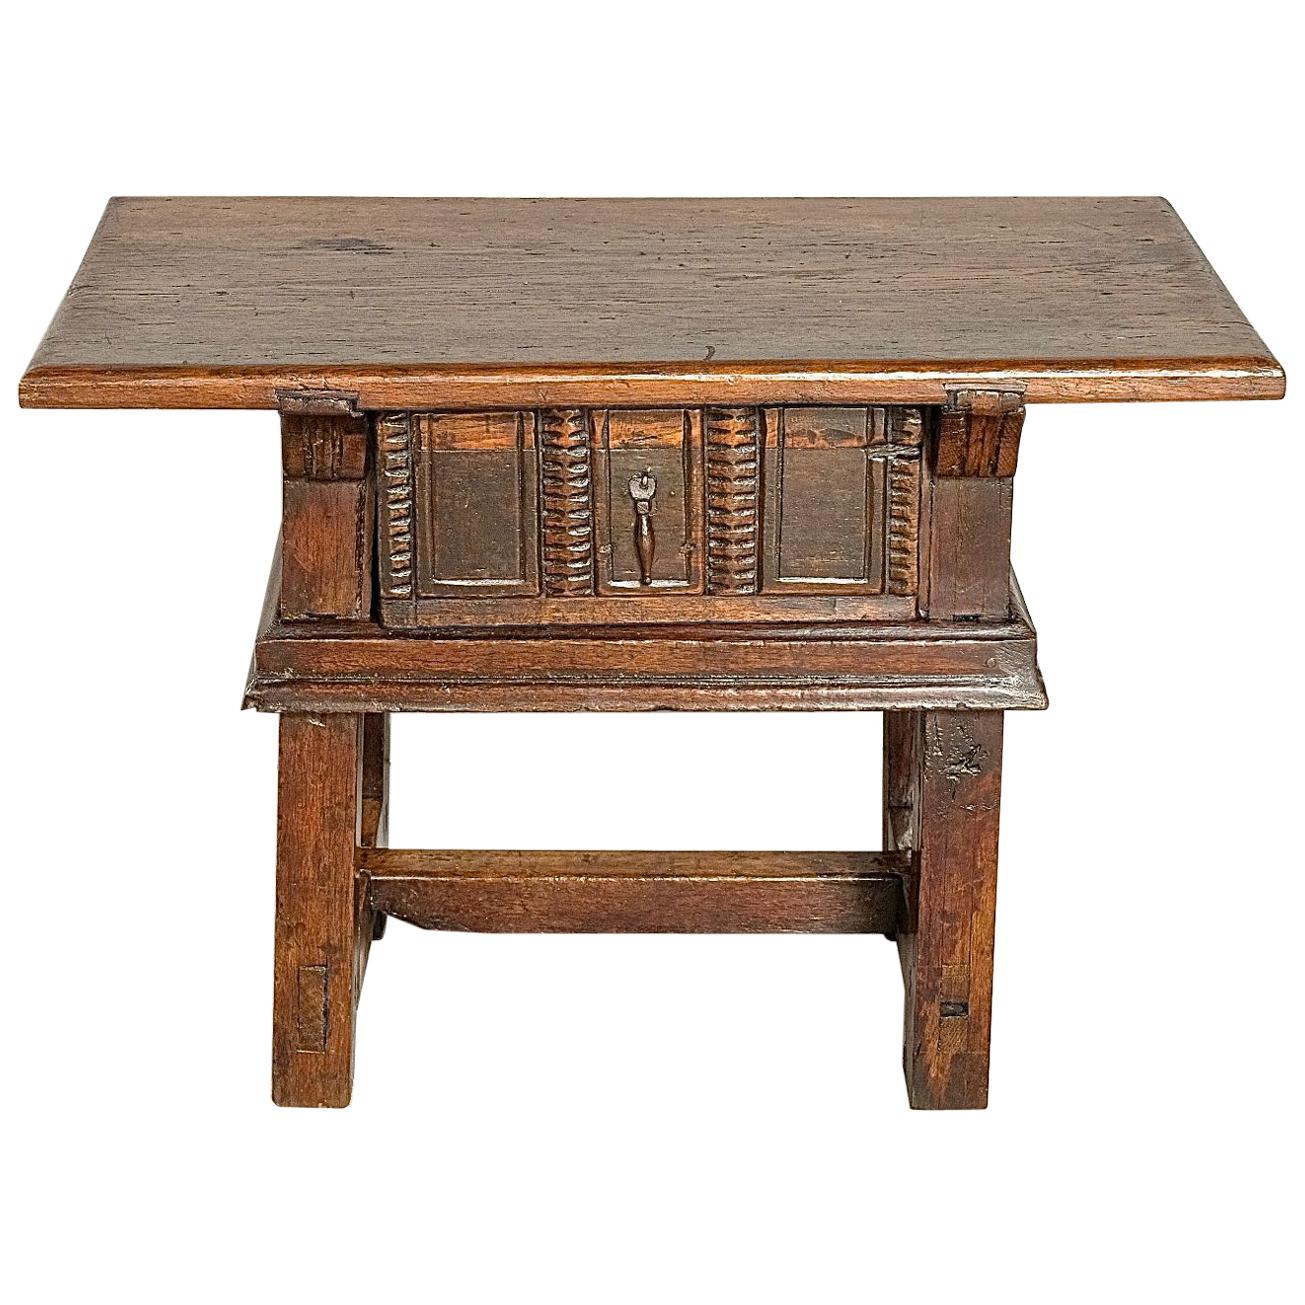 Early 18th Century Oak and Chestnut Spanish Accent Table with Drawer For Sale